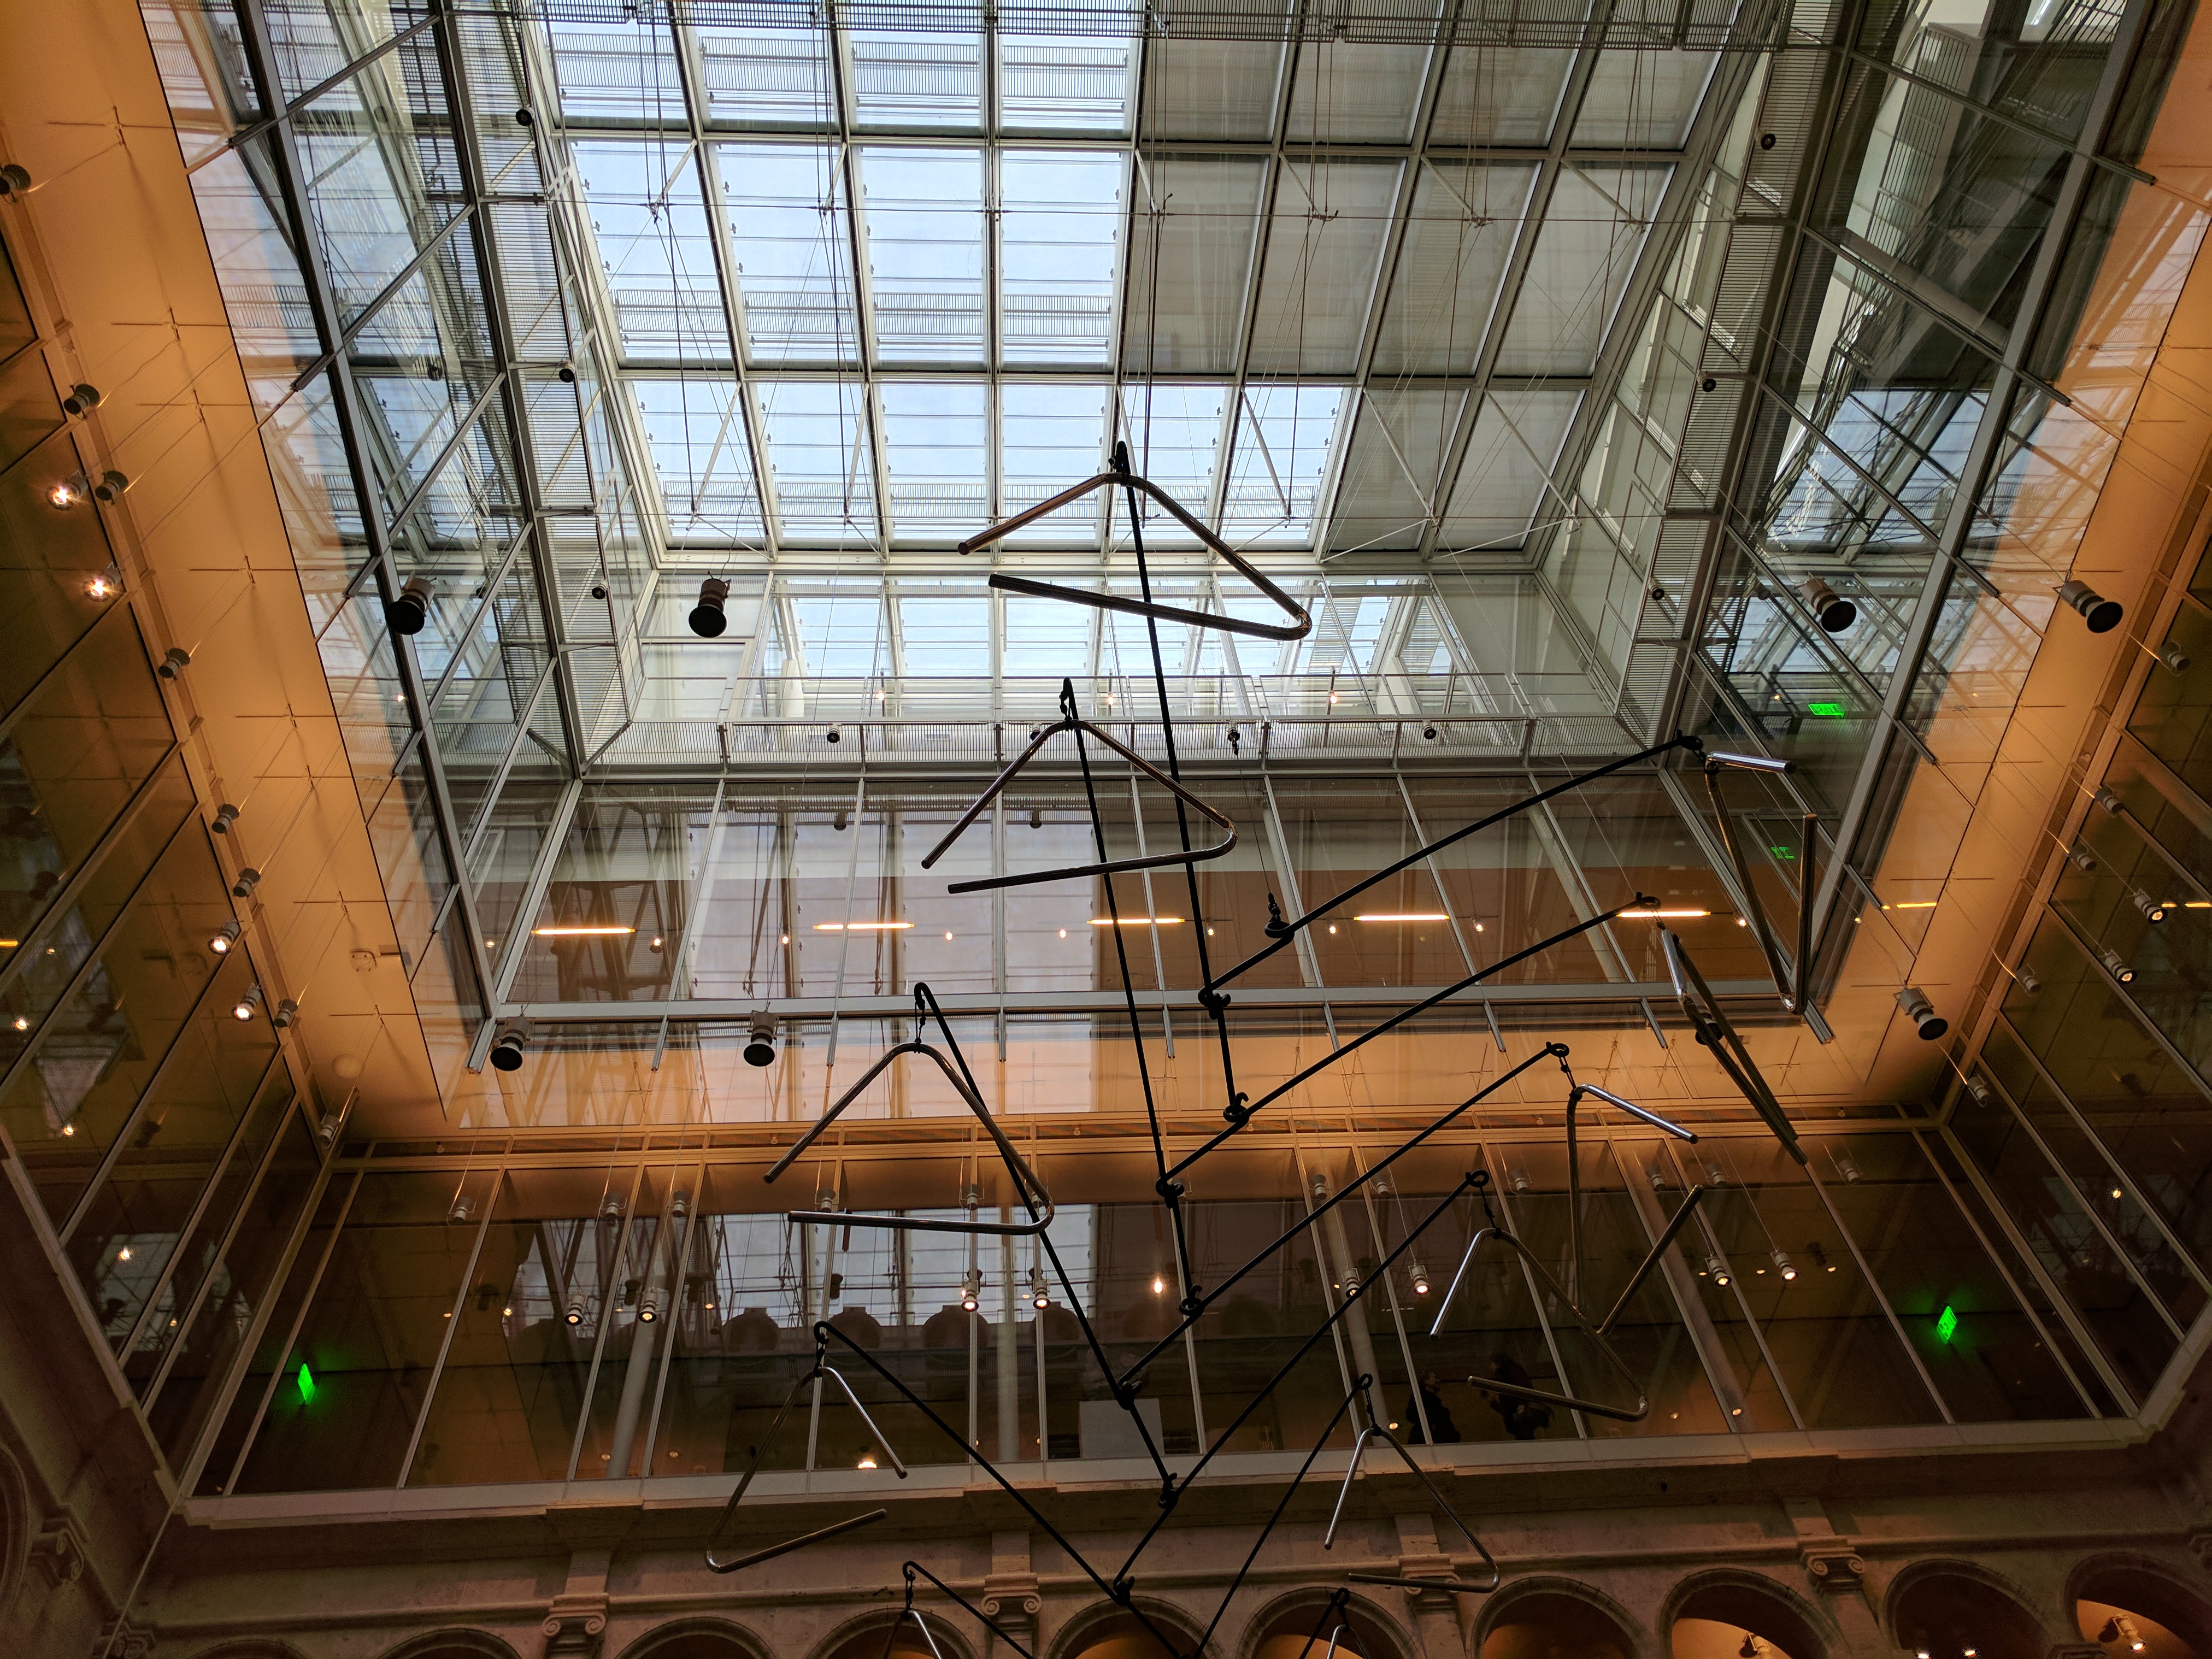 An image of the HAM's atrium, and the sky above.